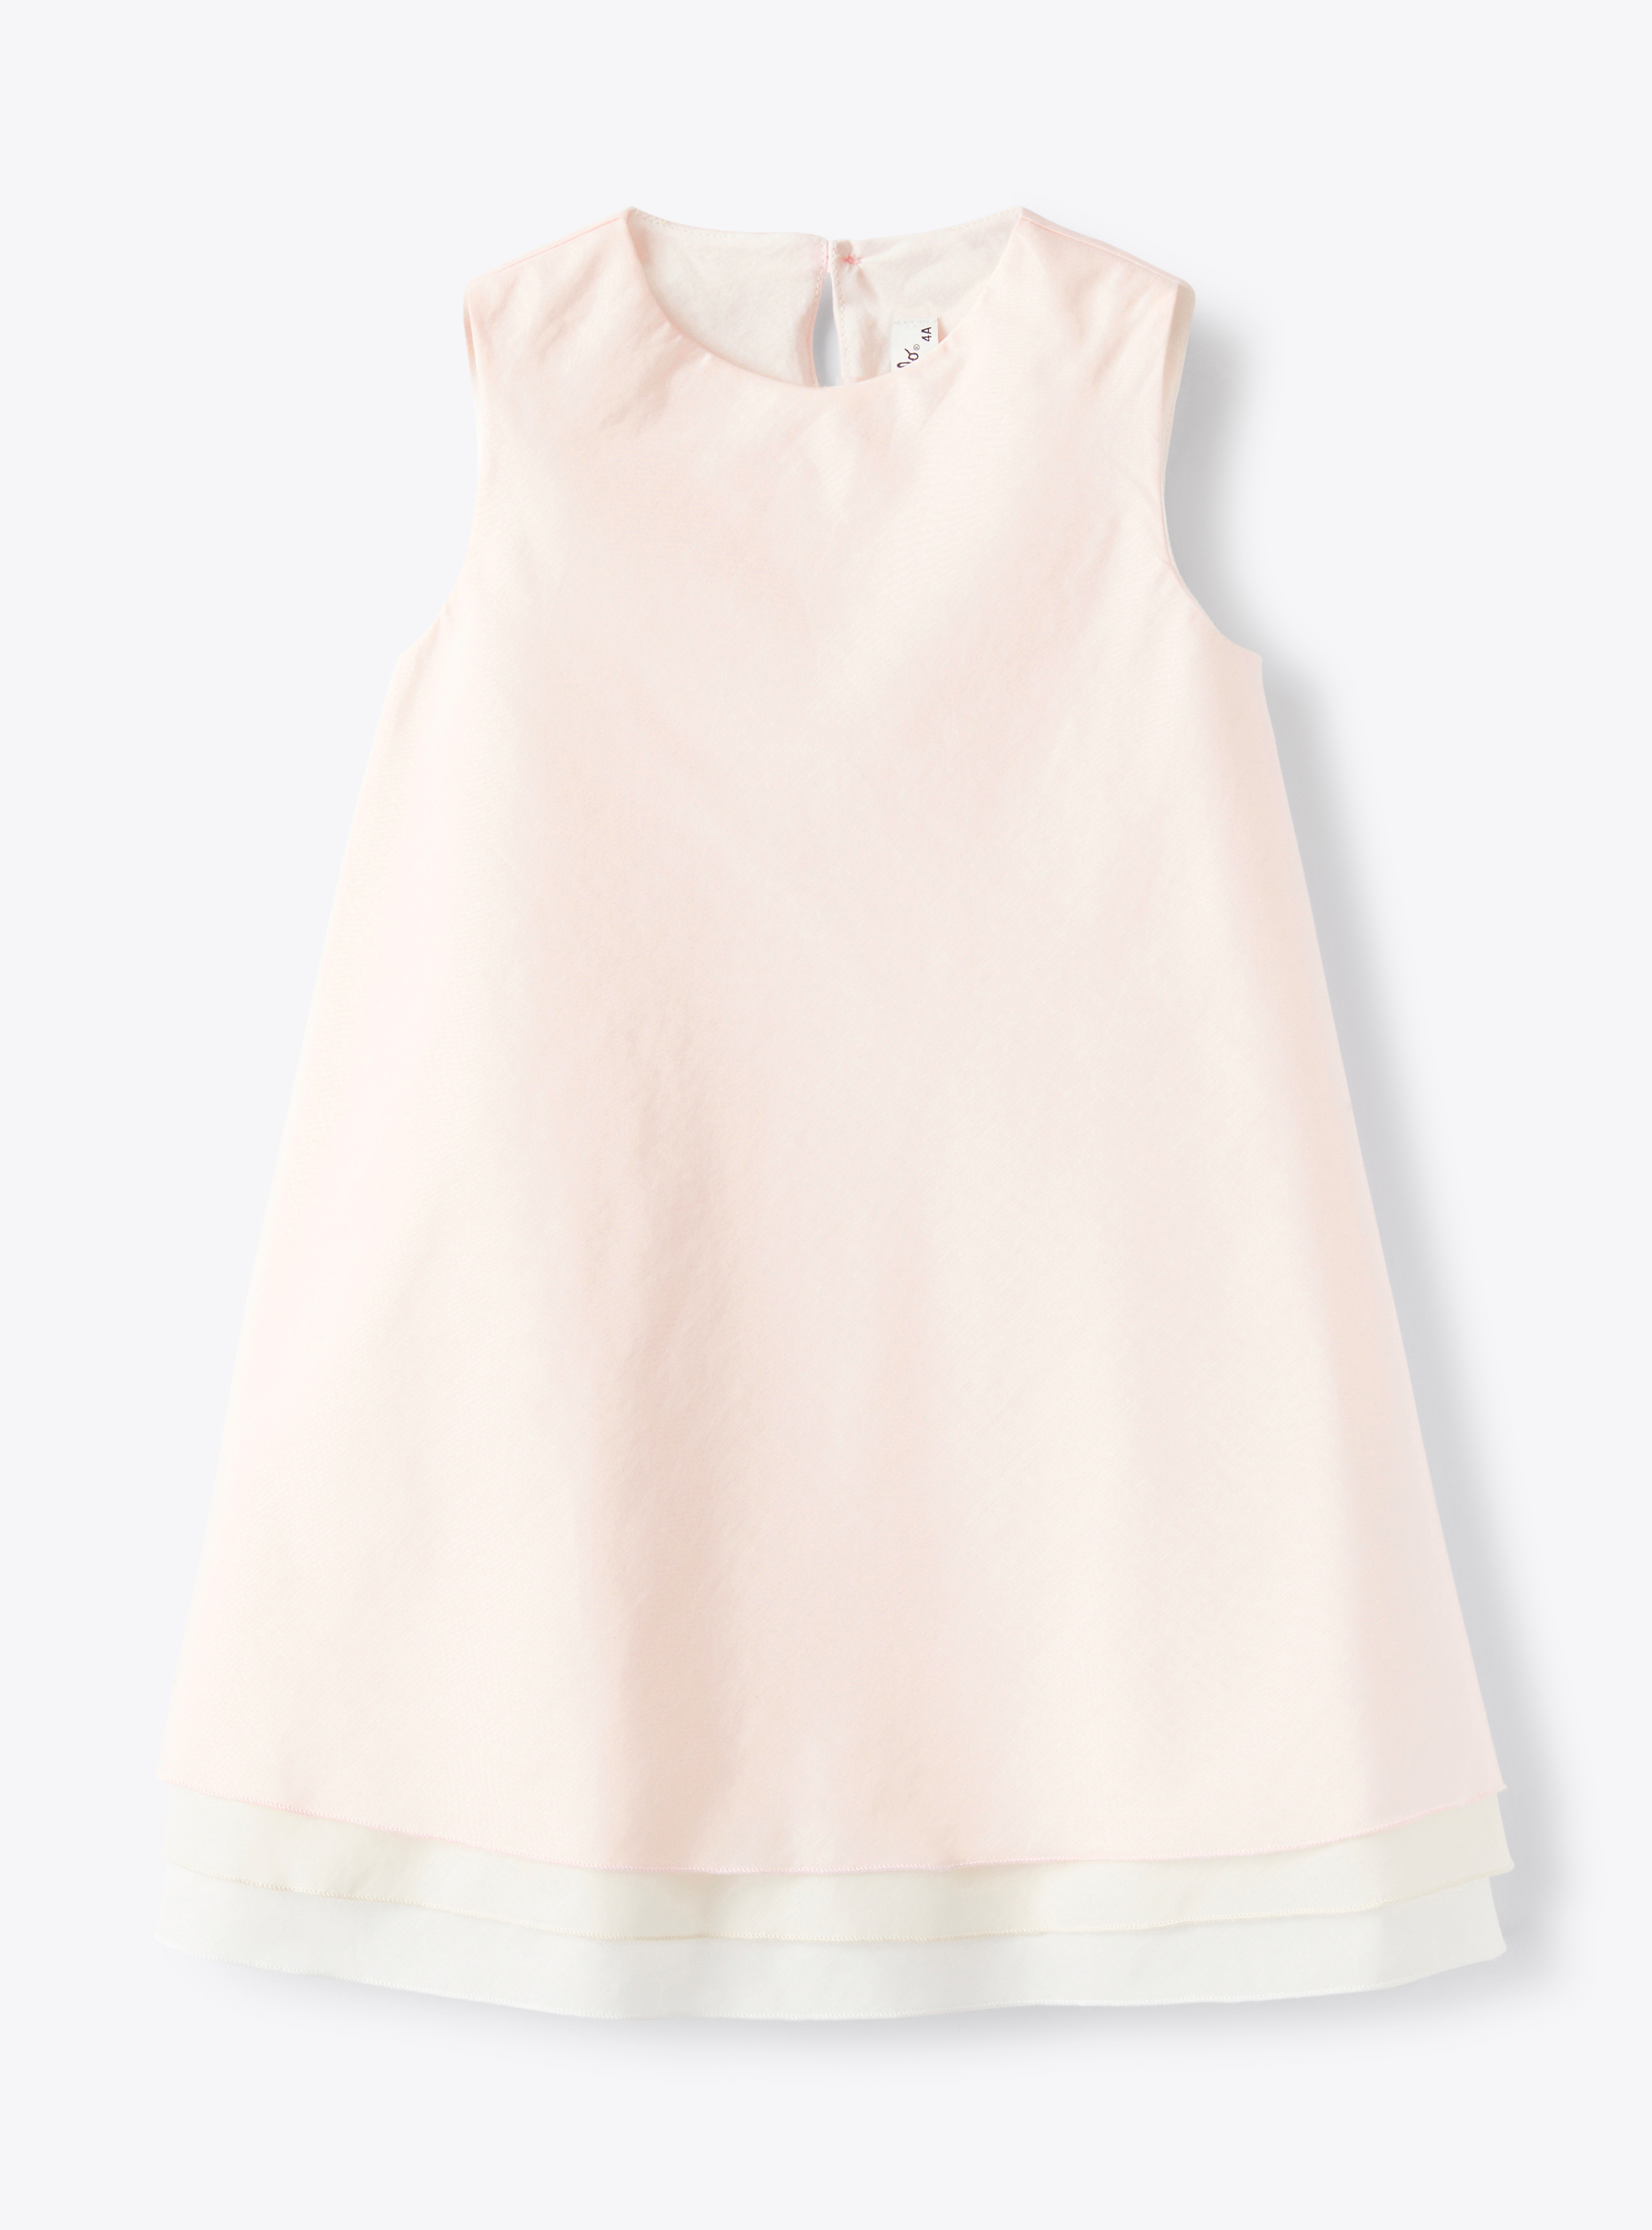 Dress in pearl-pink cotton voile with three tiers - Pink | Il Gufo